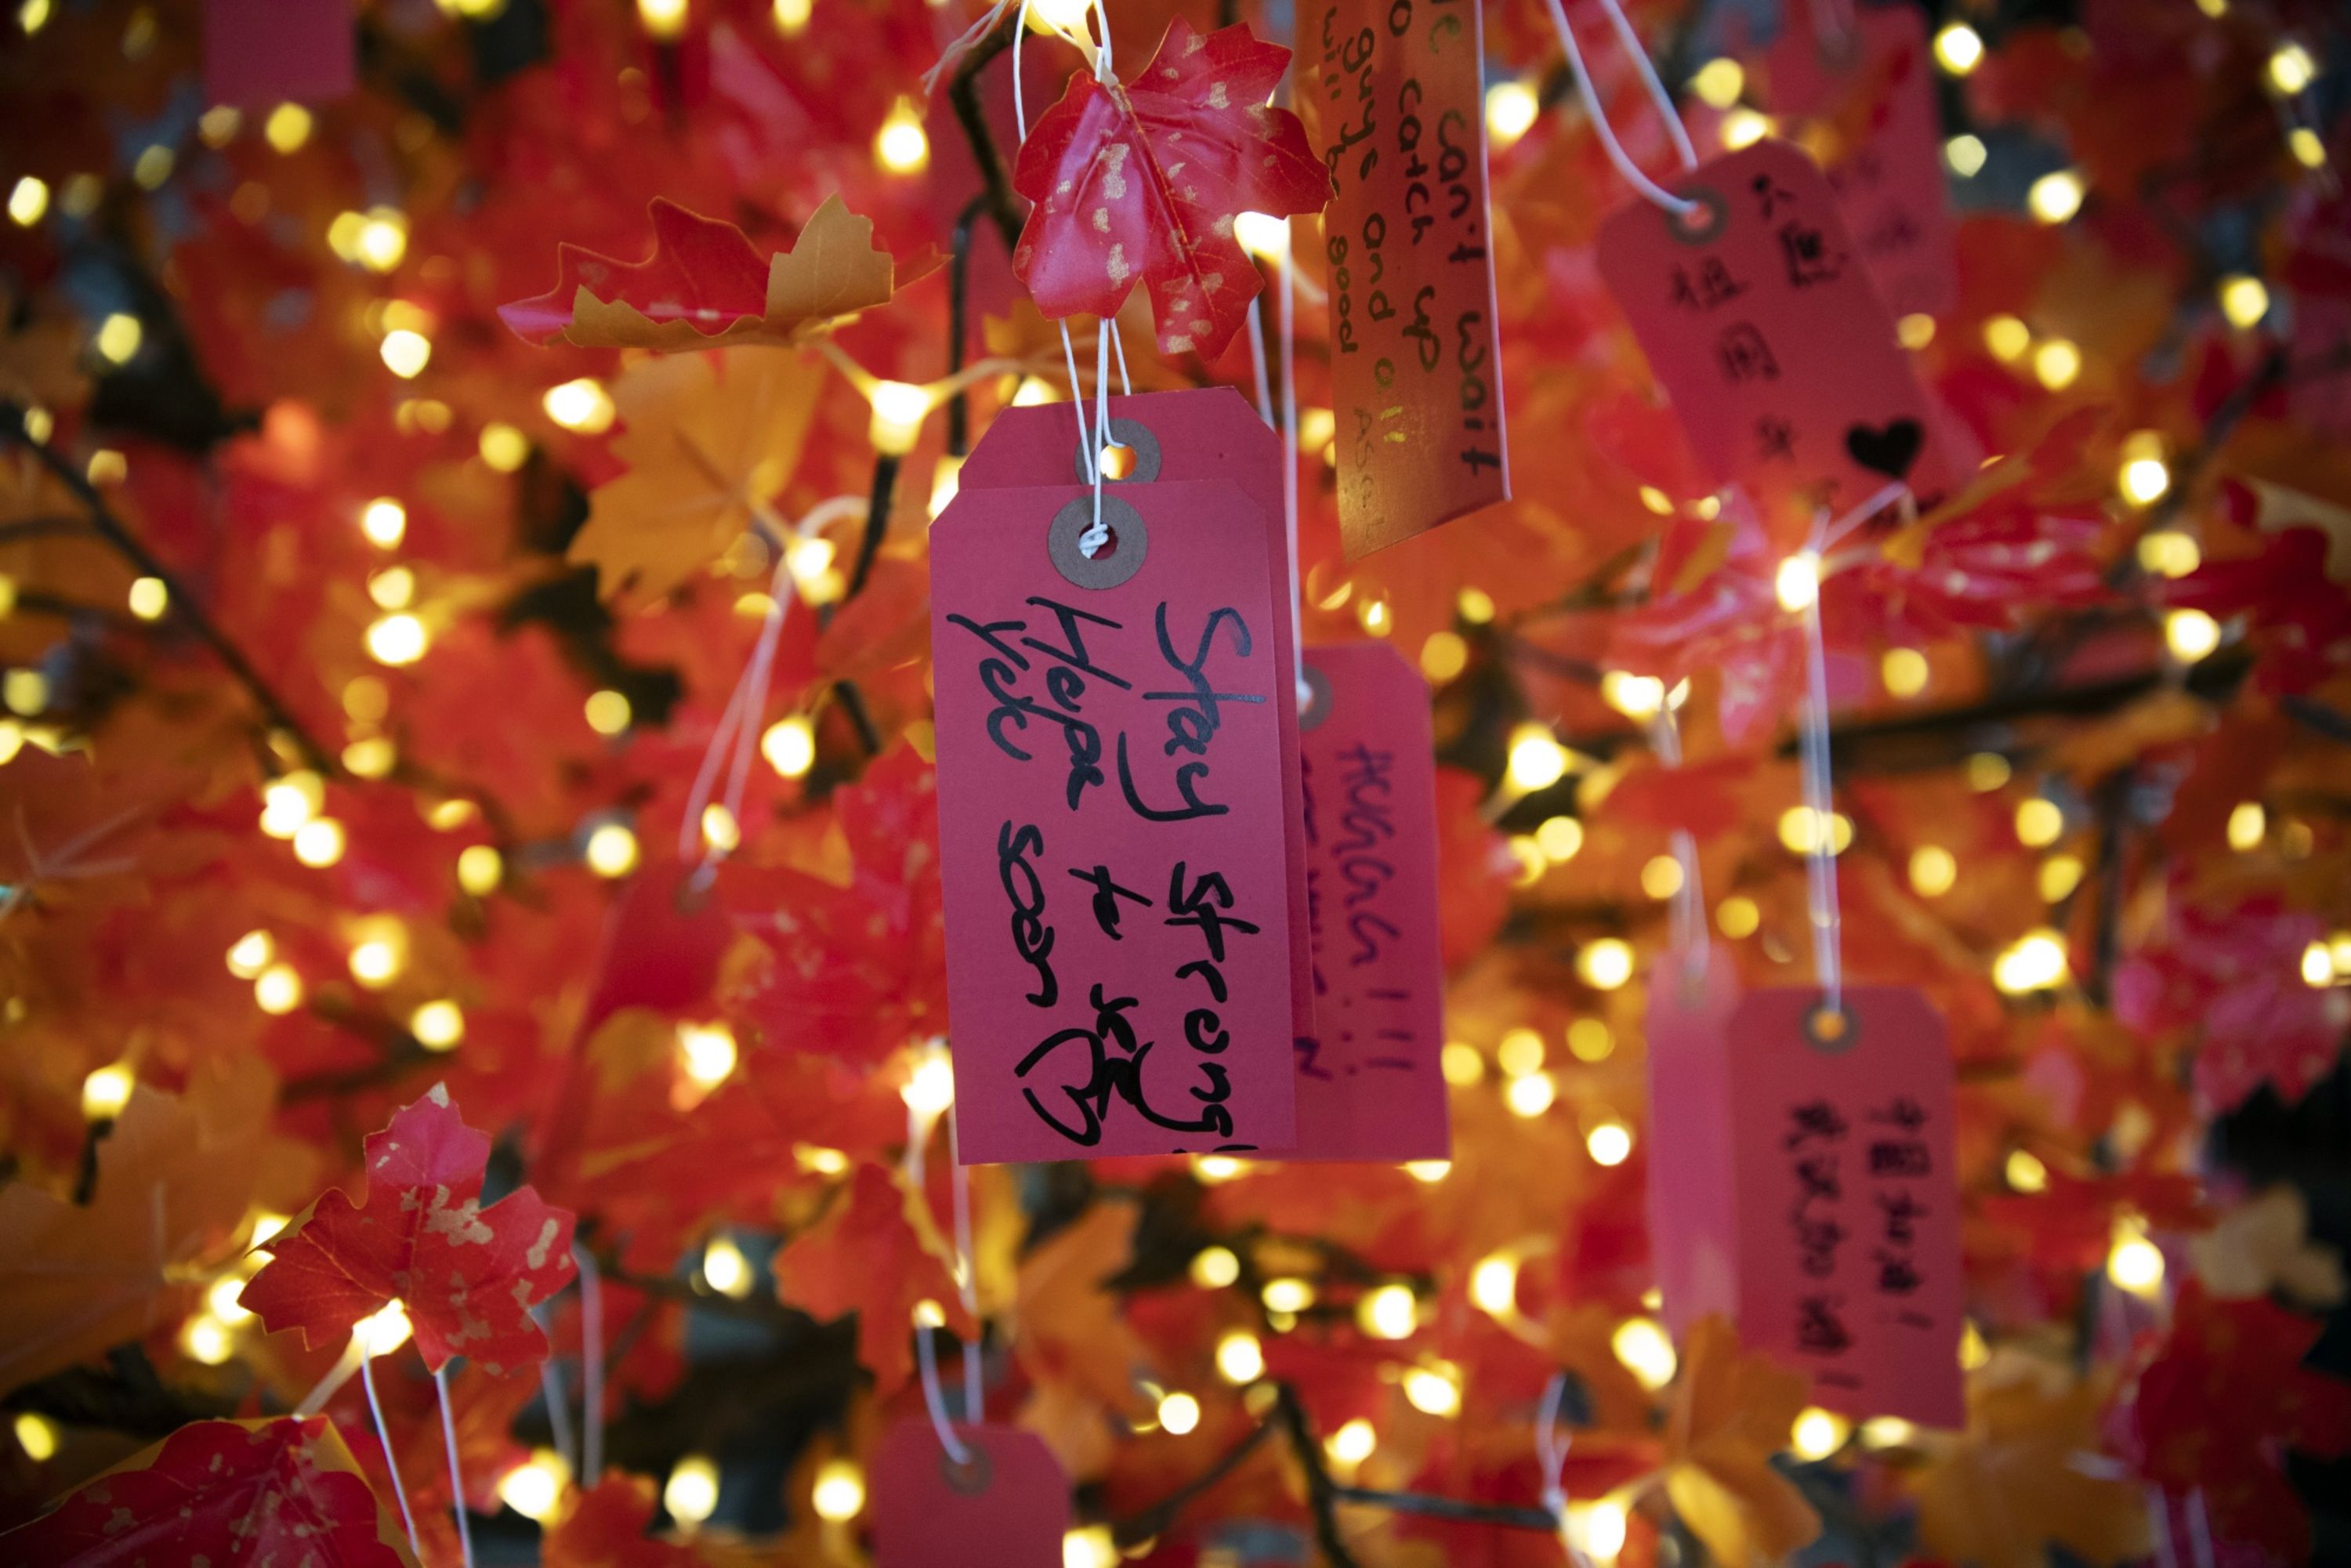 A message on a solidarity tree for Chinese students at the University of Sydney reads “Stay strong! Hope to see you soon.”